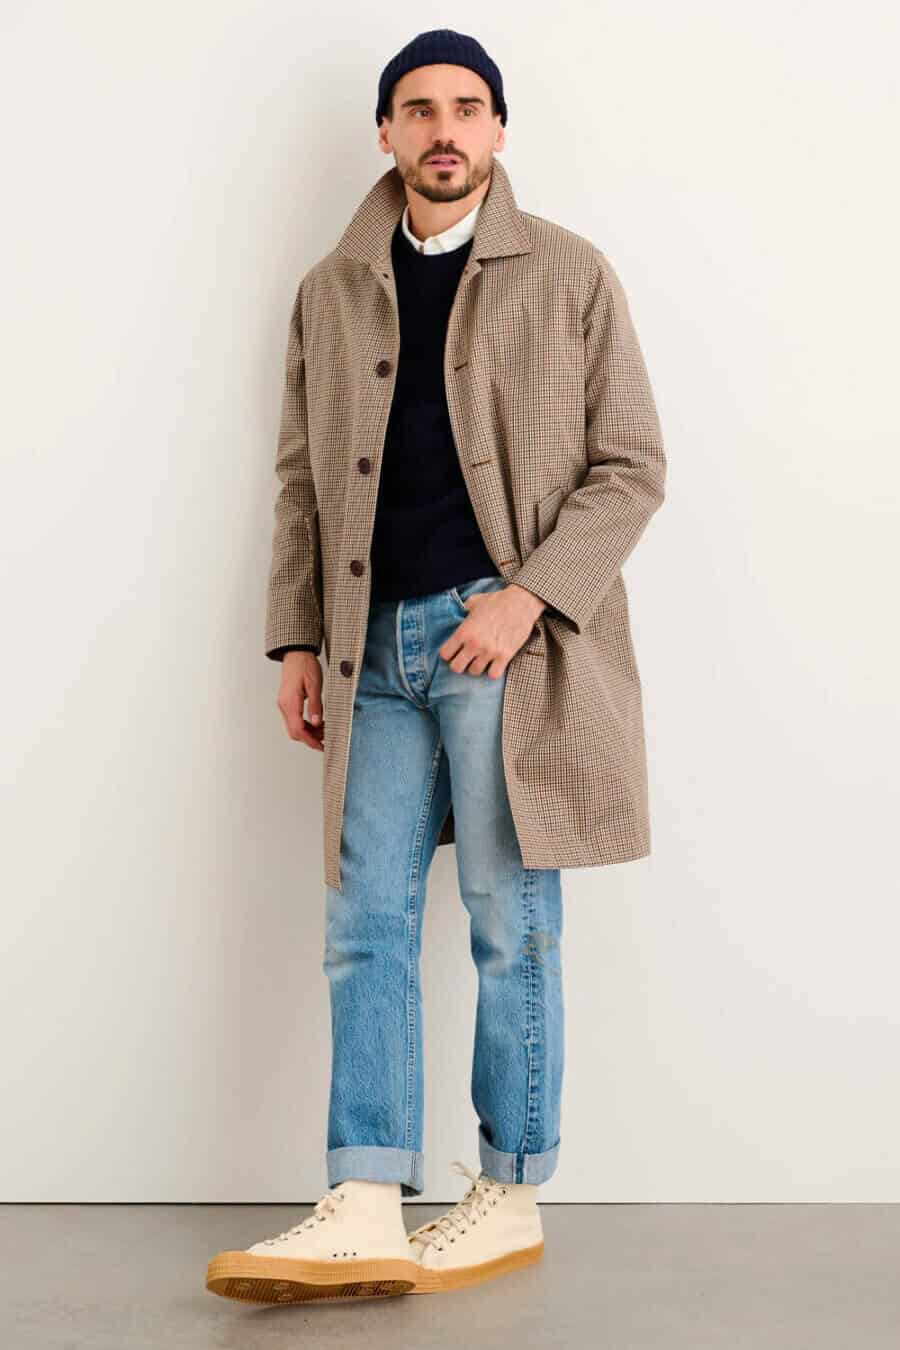 Men's spring fashion outfit - lightweight layers